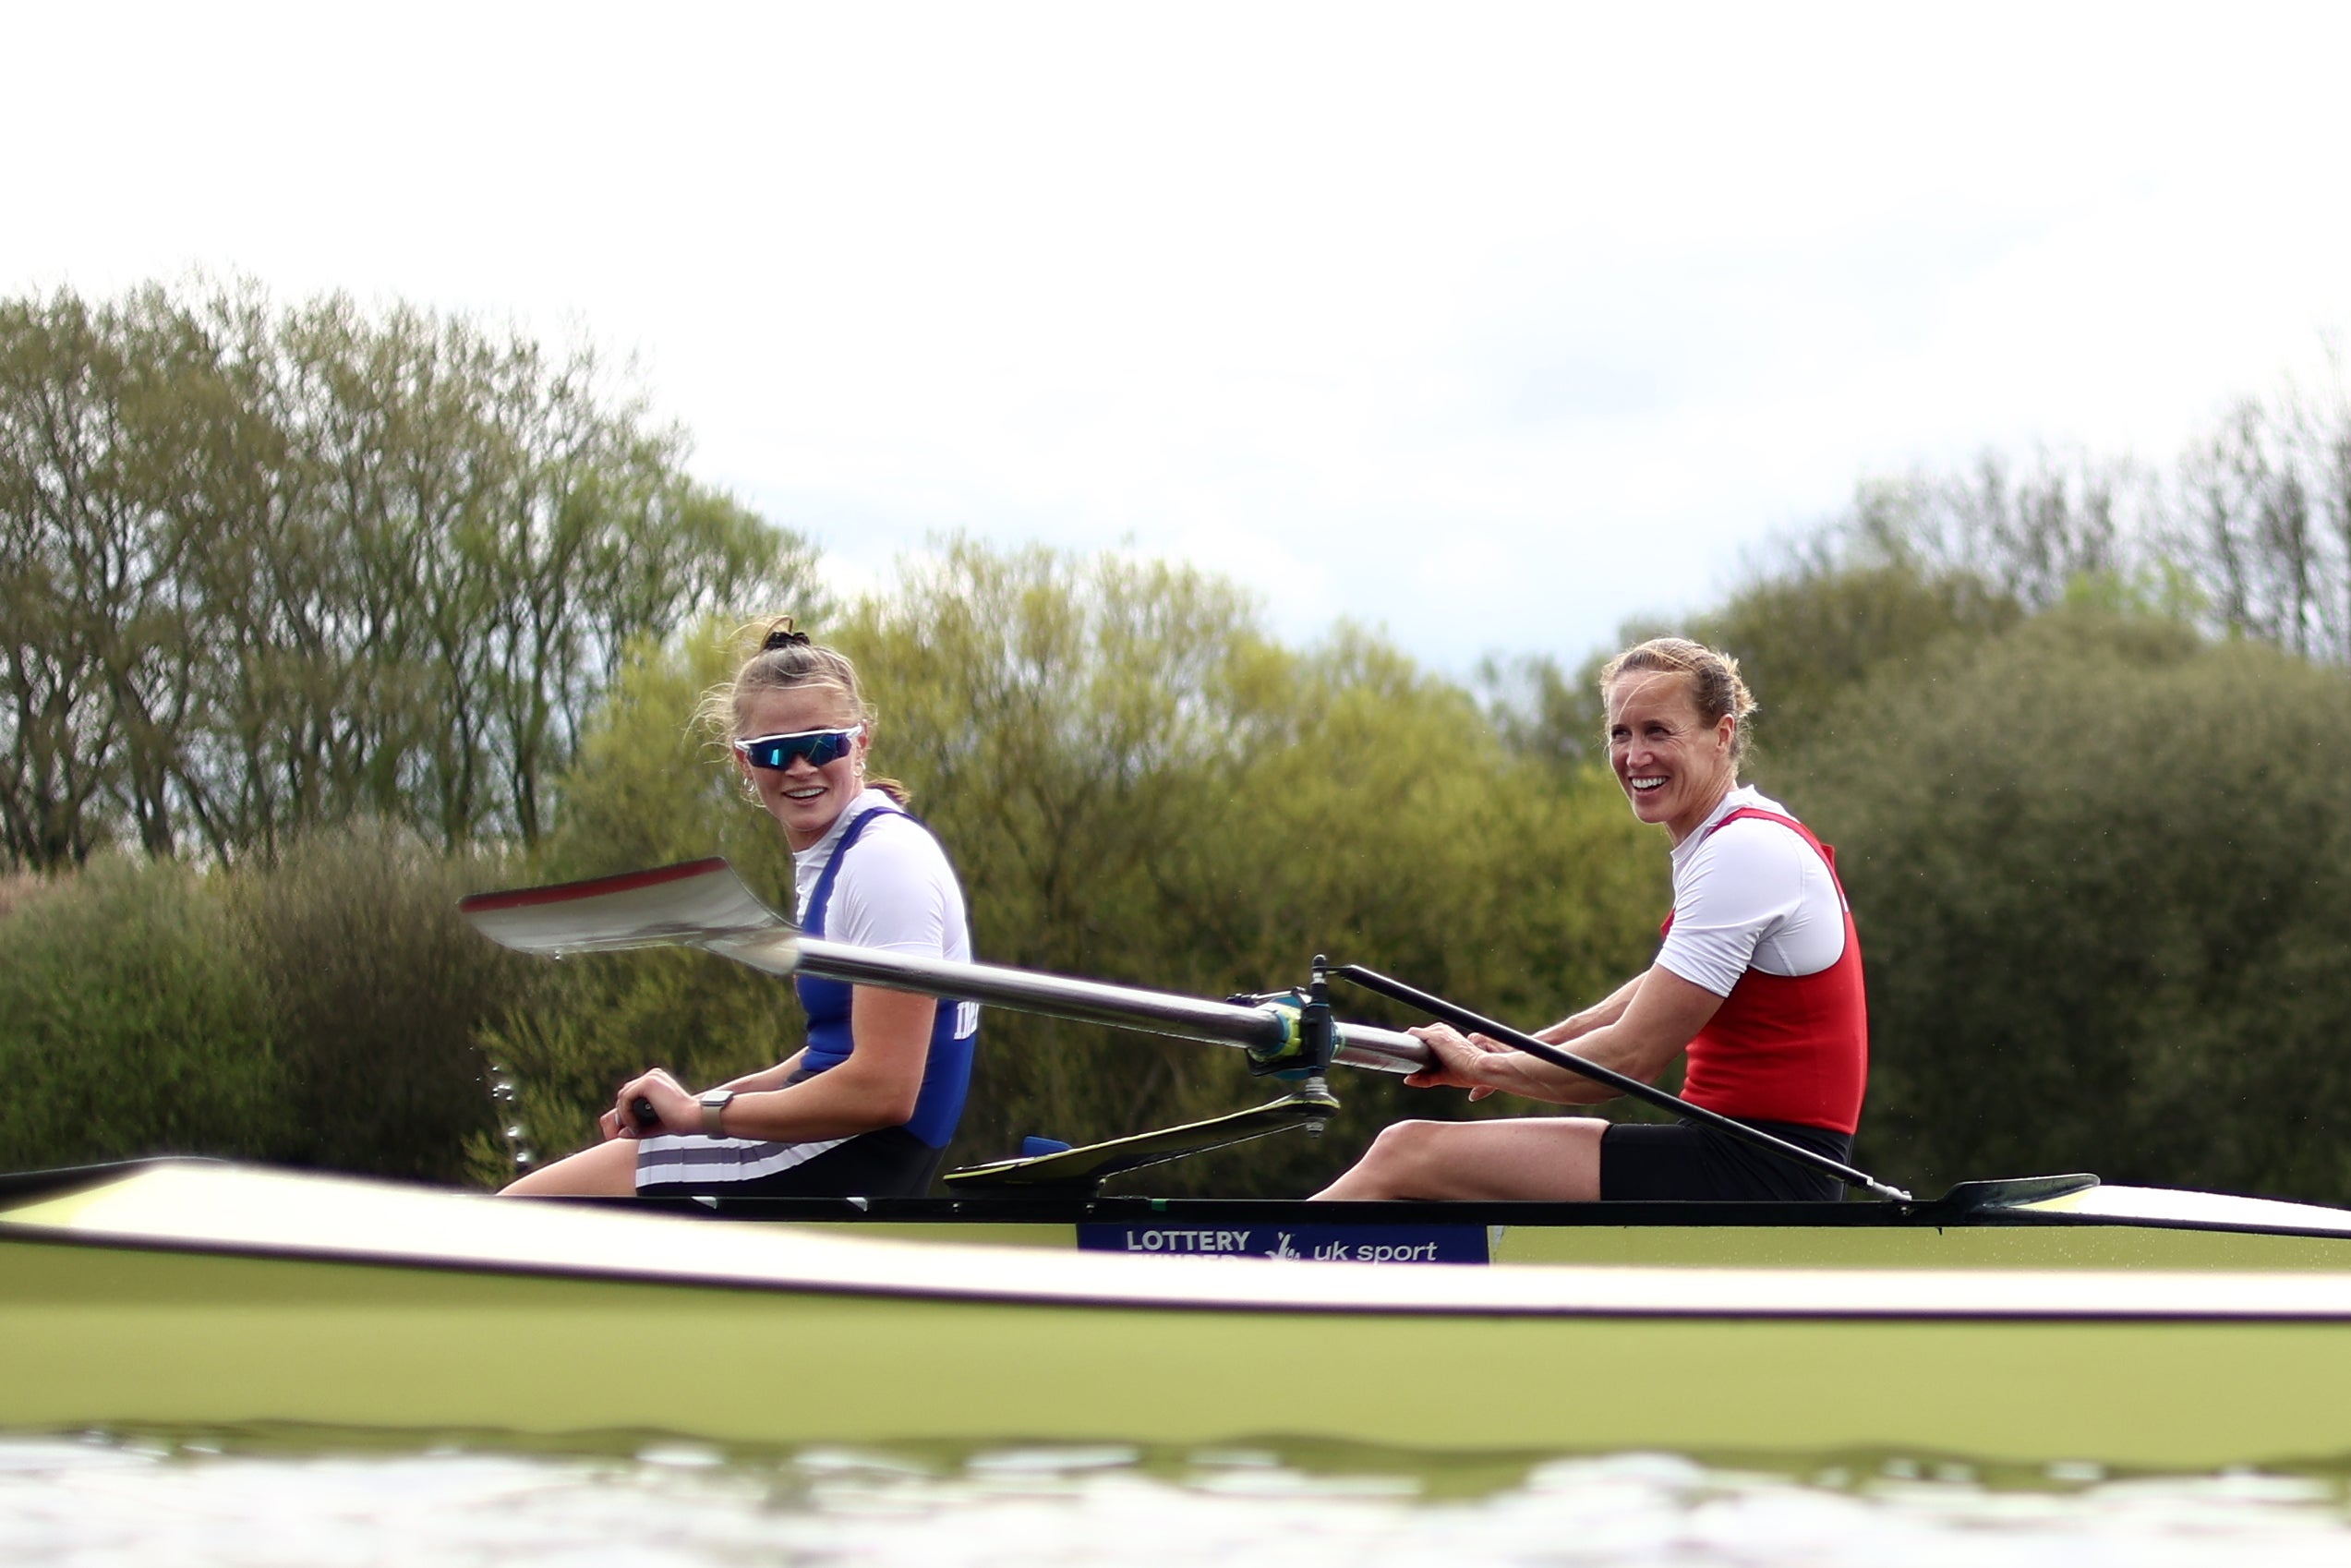 Helen Glover and Rebecca Shorten triumphed at GB Rowing trials